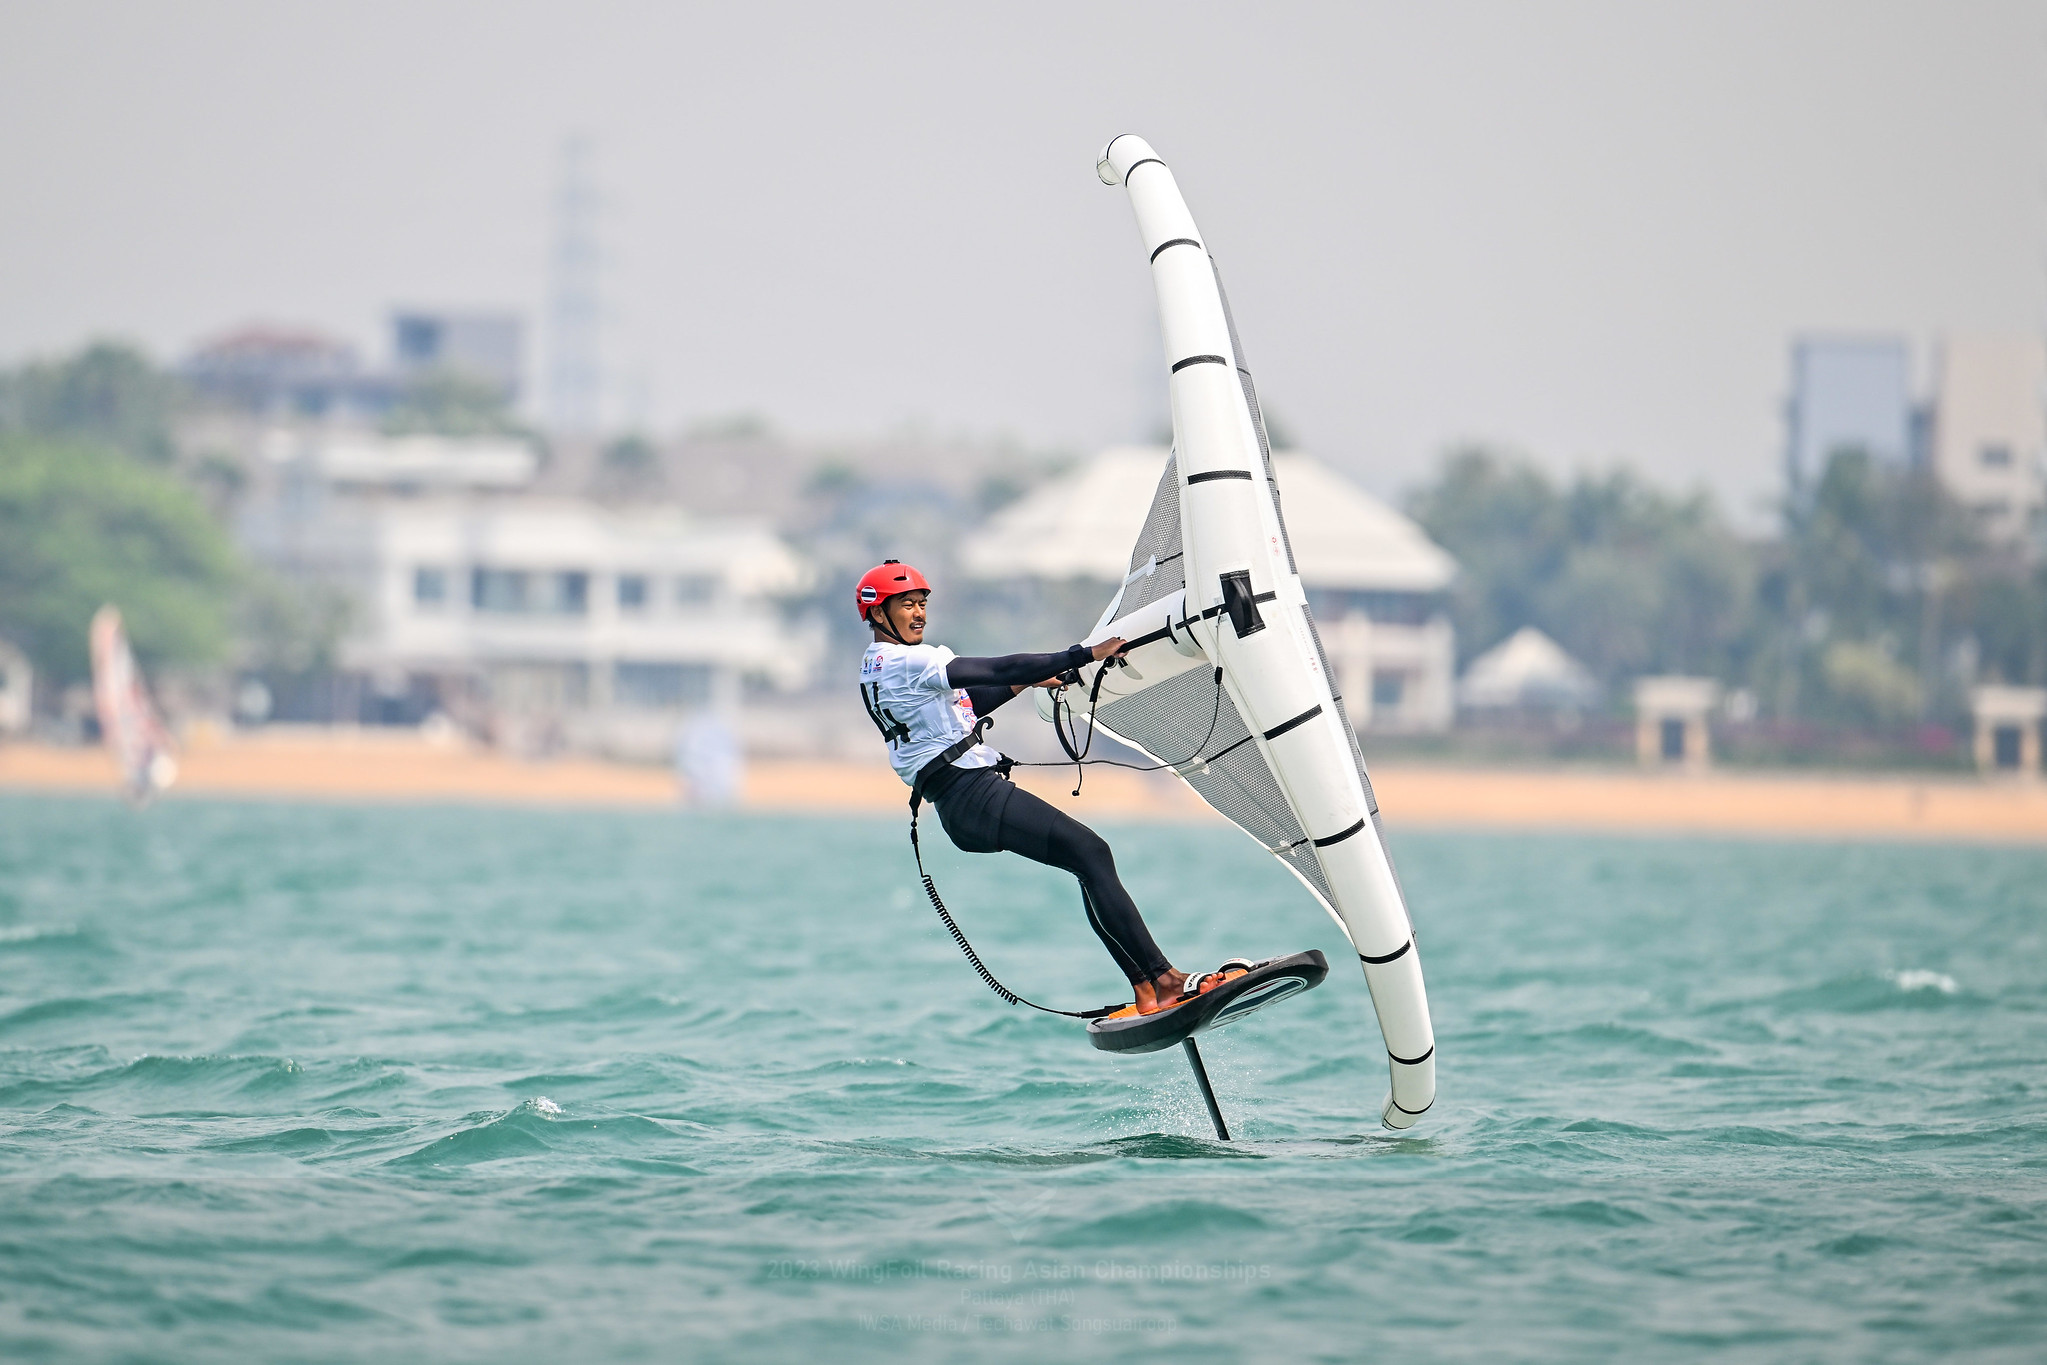 20230302_TH_Wingfoil_Asian_Day3_TS01428 - 2023 Asian Championships